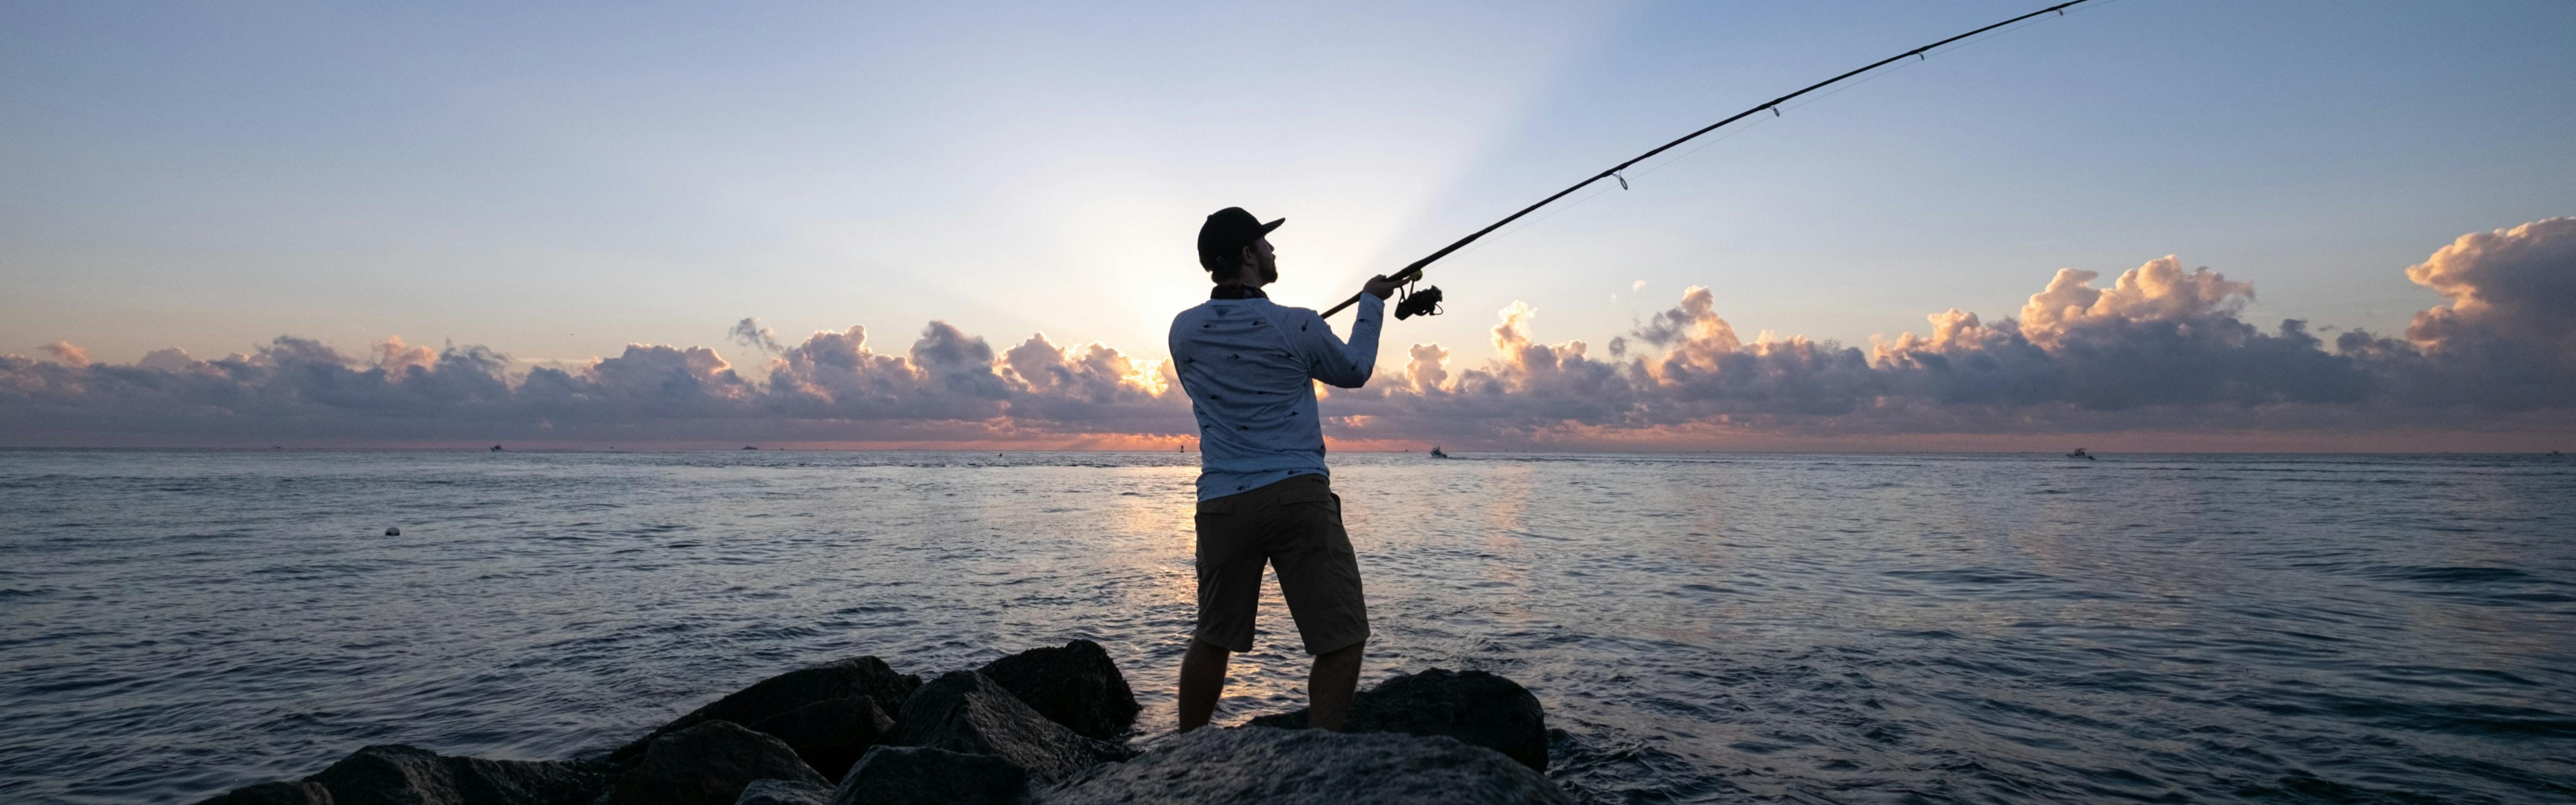 Fishing Rod and Reel Combos: How to Choose the Best One for You